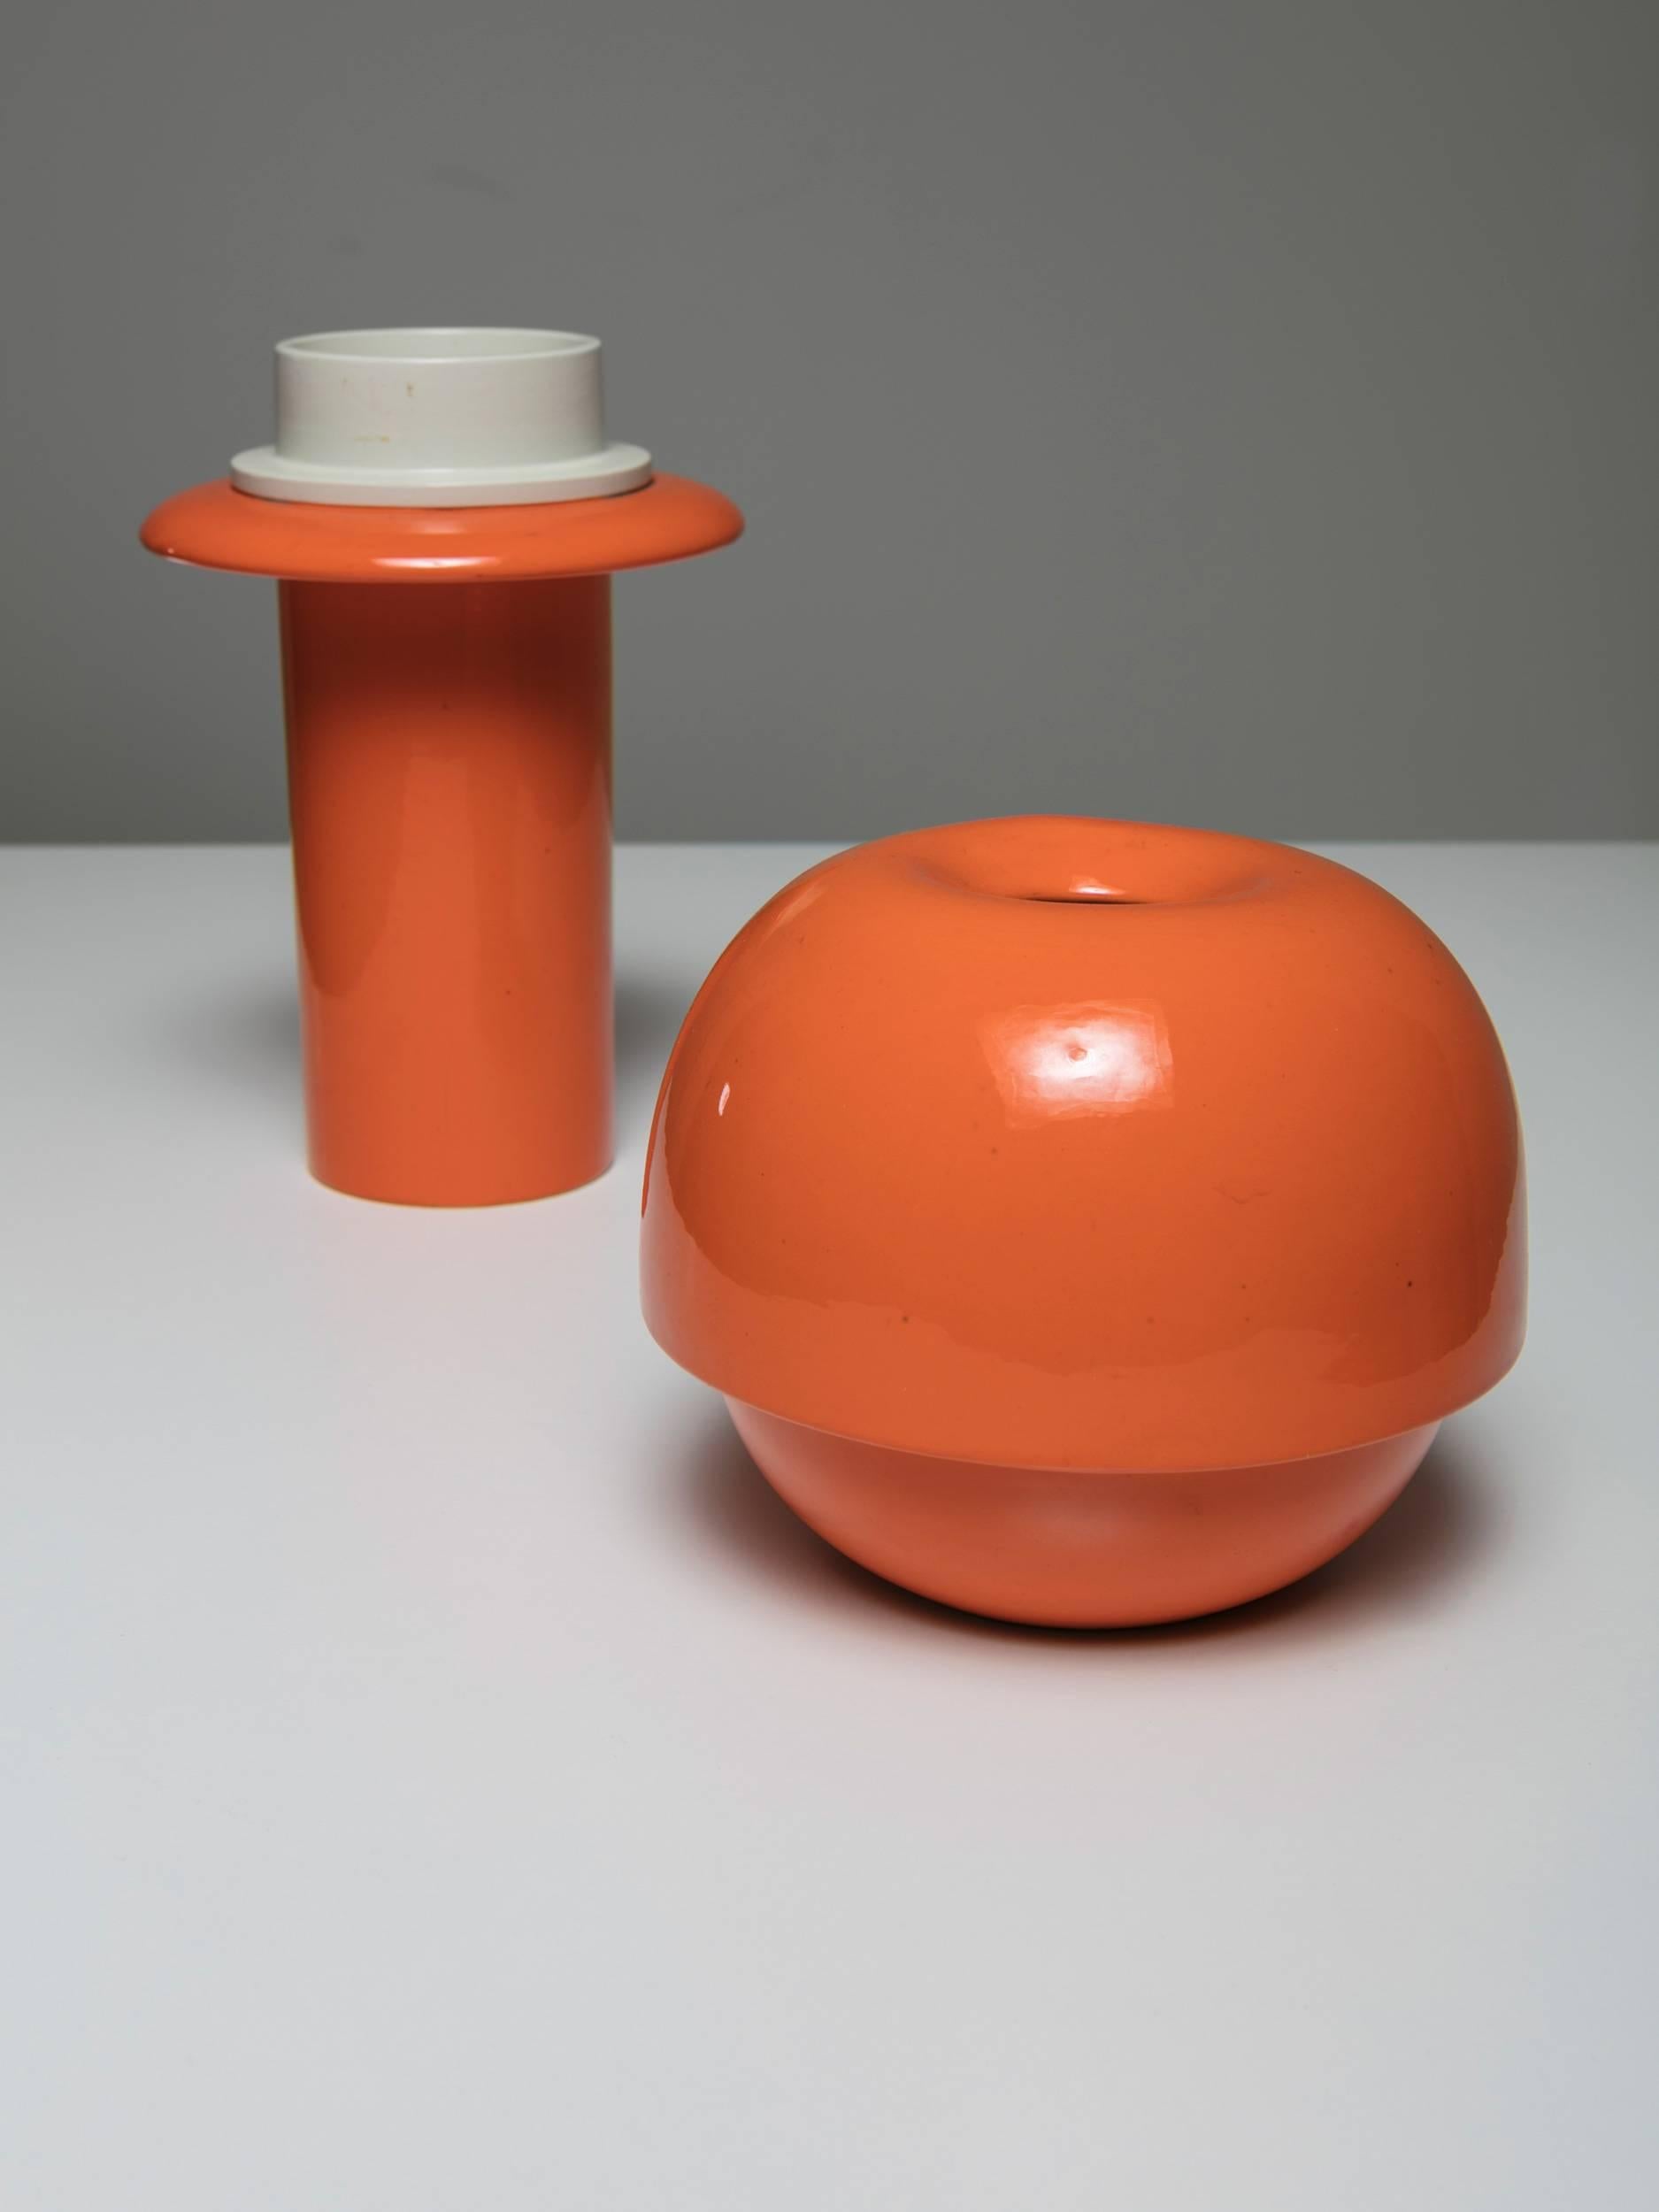 Italian 1970s ceramic vases by SIC.
Bi-colored pieces with typical 1970s shapes.